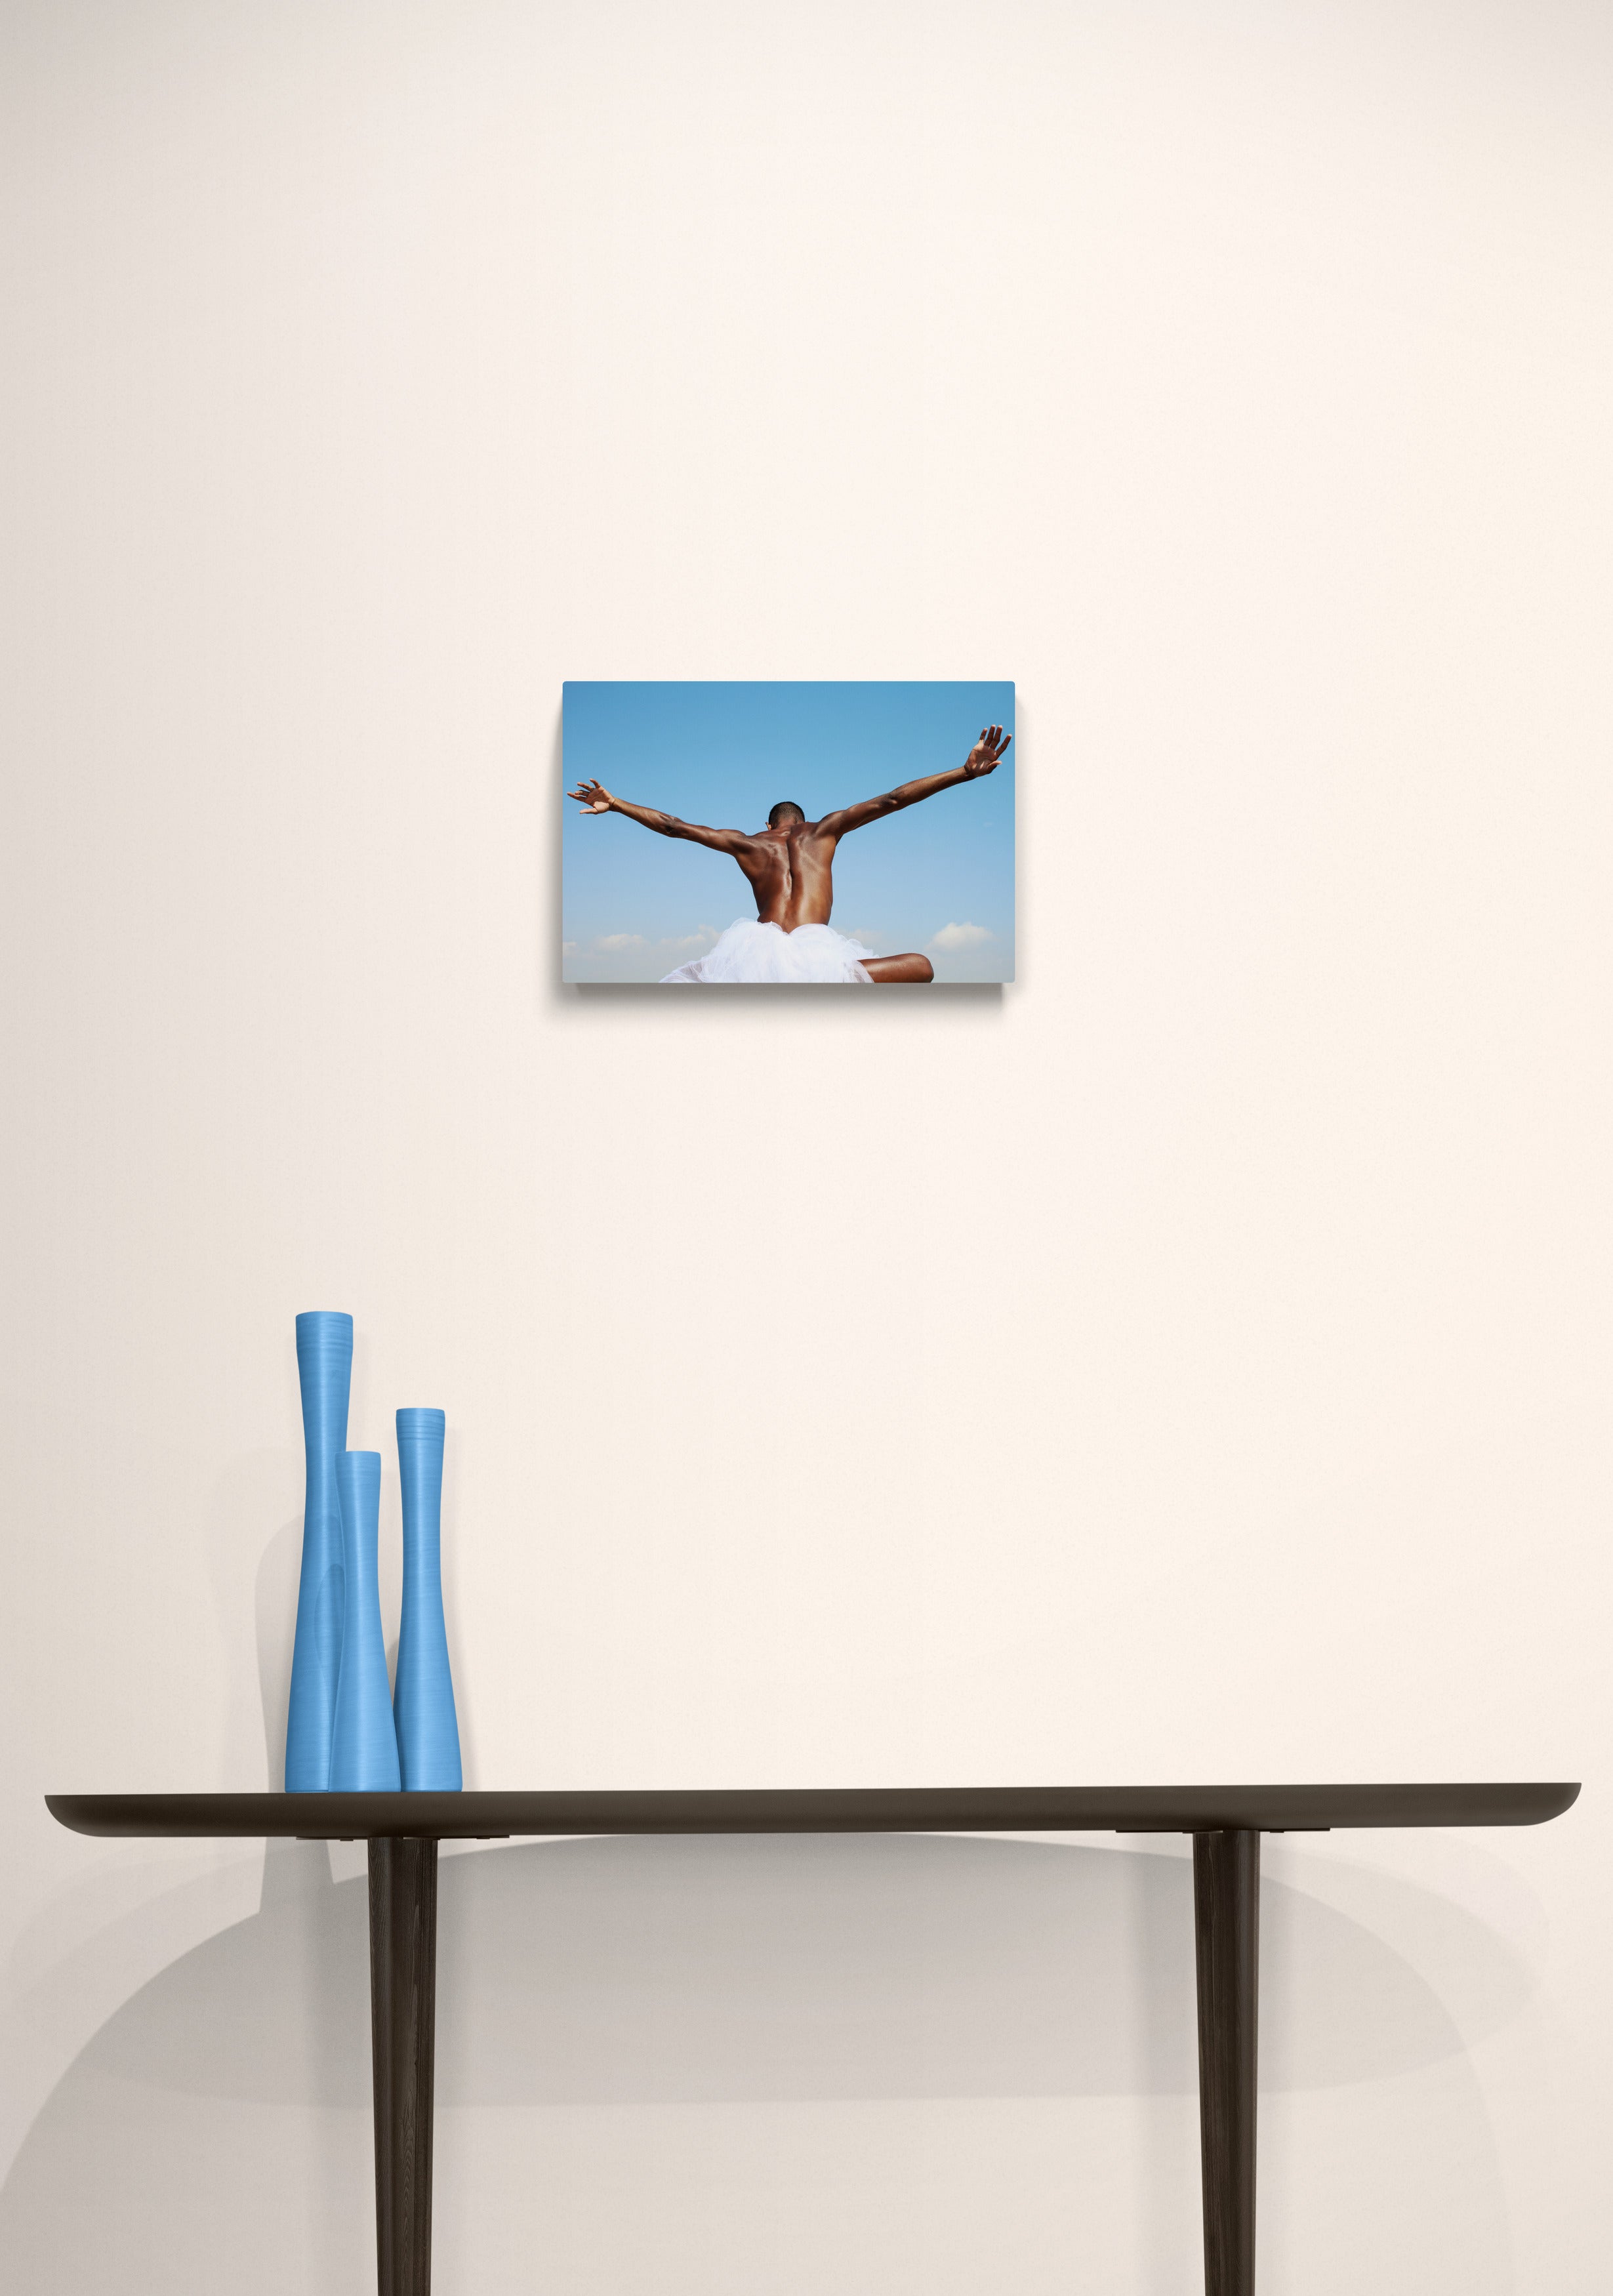 With open arms, we see a black male spreading his hands like wings into the blue sky. Art print on a white wall.